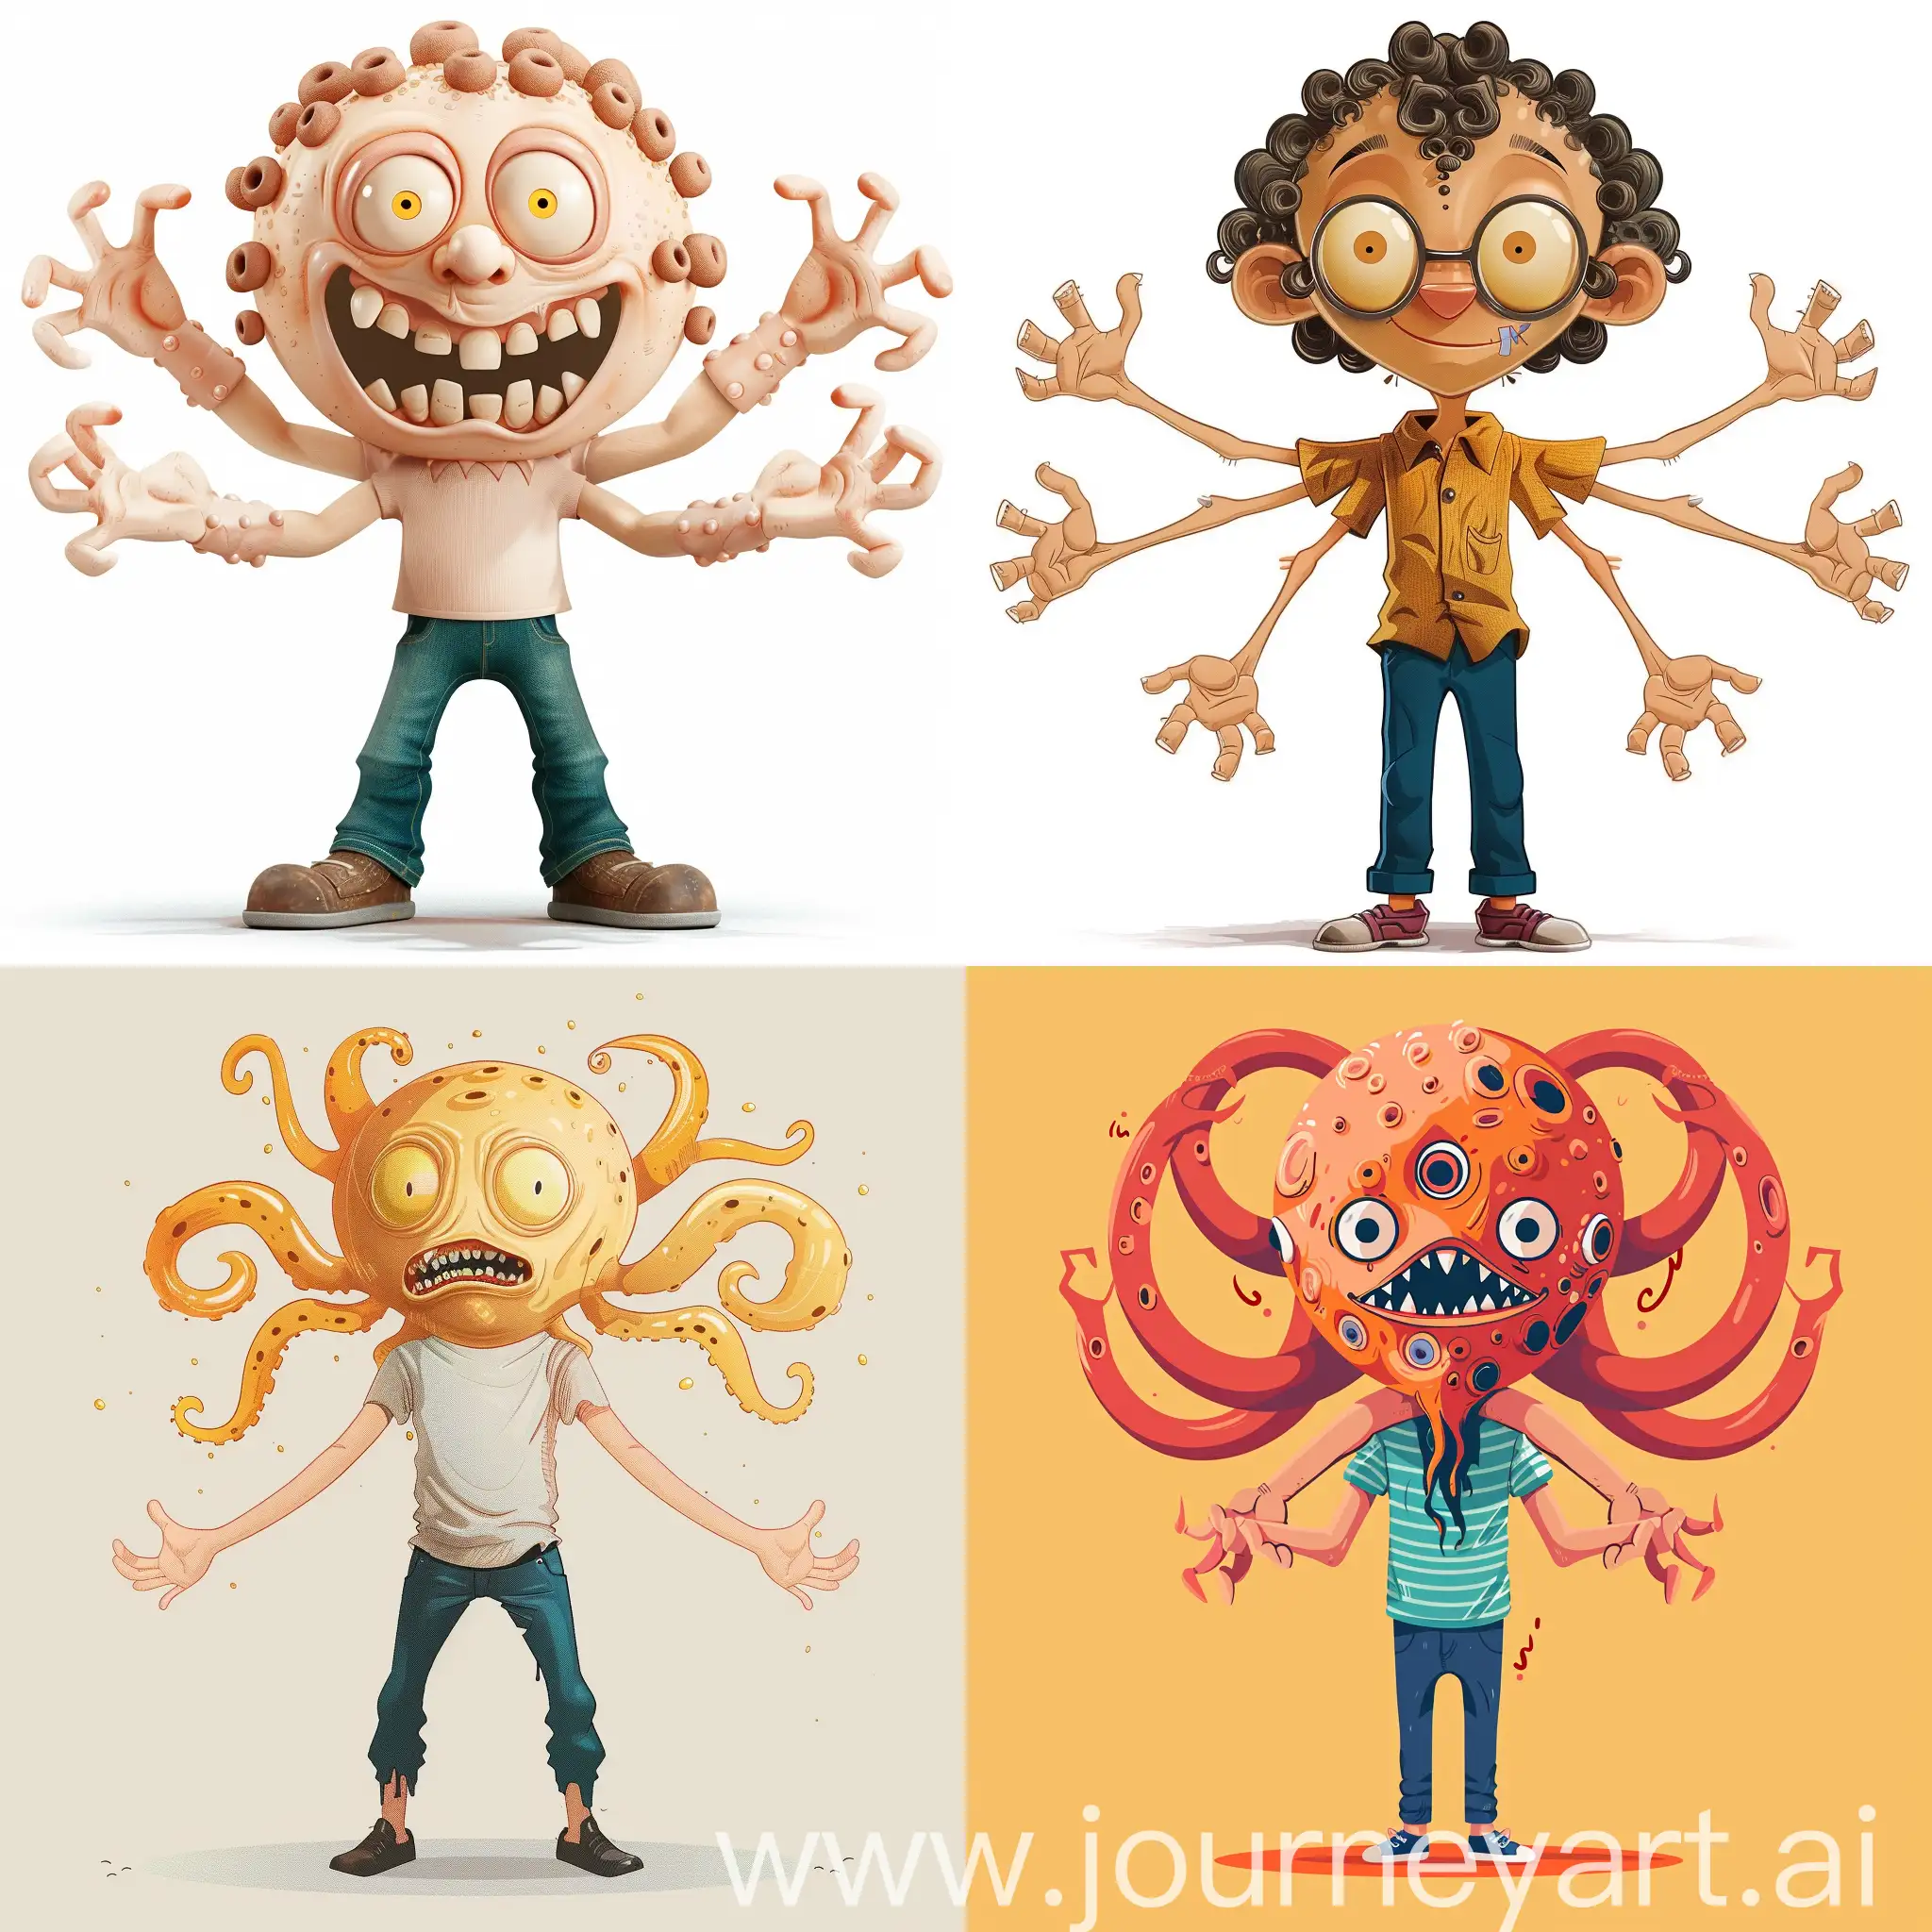 Playful-Cartoon-Character-with-Multiple-Arms